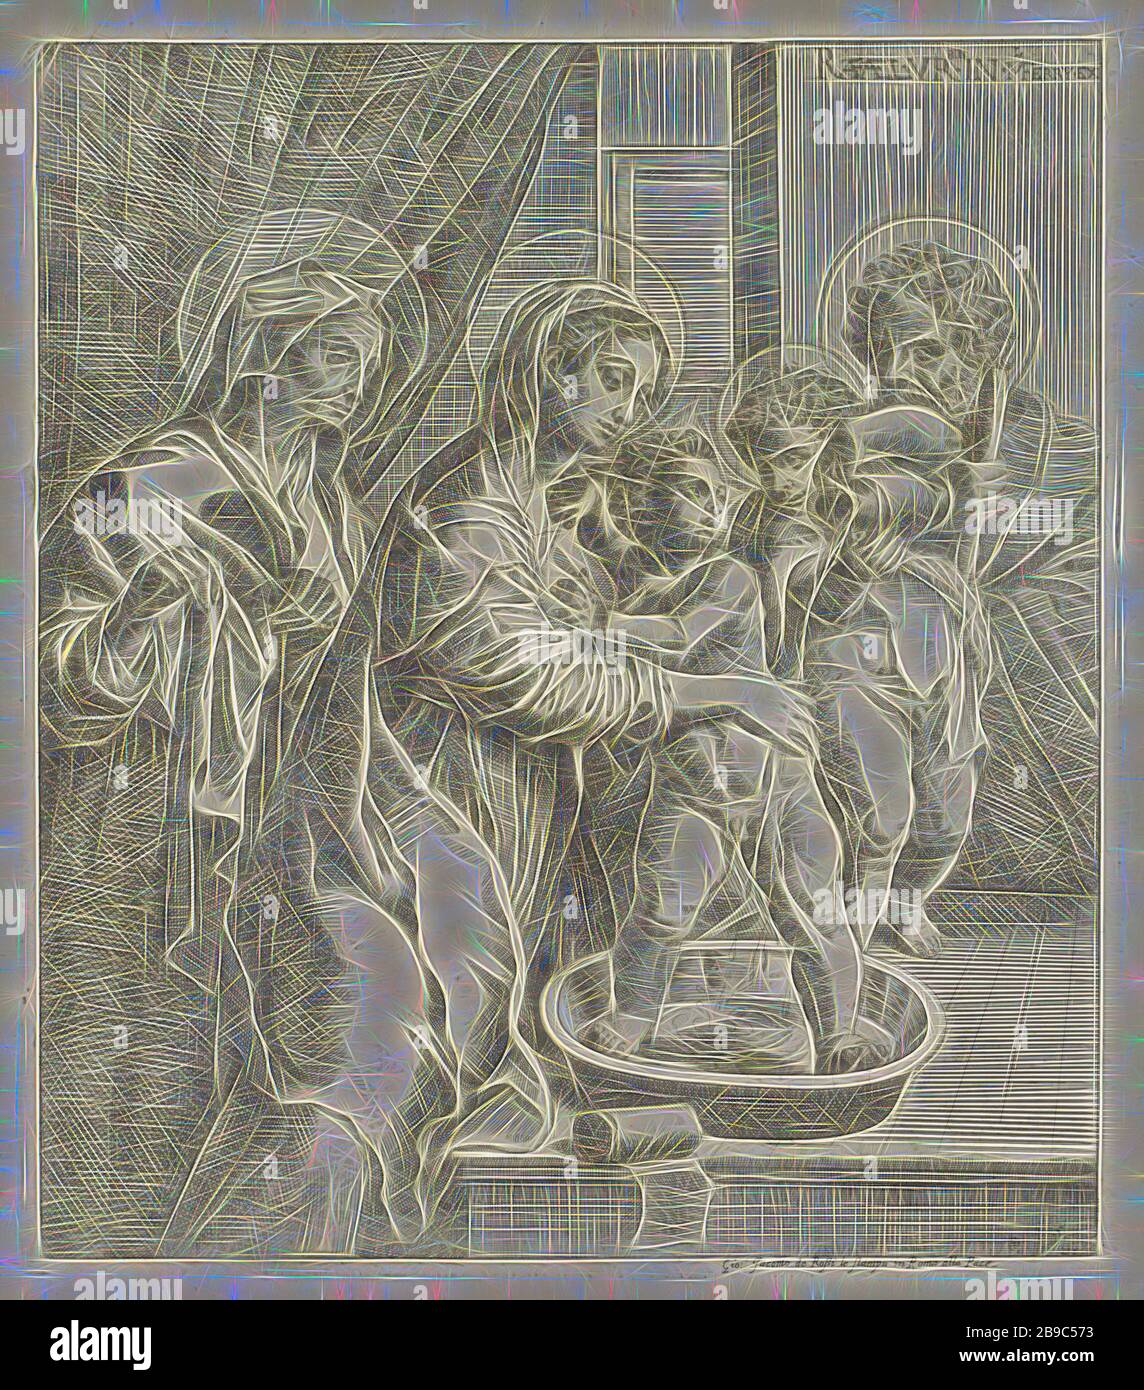 Mary and the young John the Baptist wash the Christ child, Mary and the young John the Baptist wash the Christ child. In the background are Joseph and Elizabeth., Mary, the Christ-child and John the Baptist, Elisabeth present, washing and changing baby, Pietro Facchetti, Rome, 1637 - 1691, paper, engraving, h 298 mm × w 260 mm, Reimagined by Gibon, design of warm cheerful glowing of brightness and light rays radiance. Classic art reinvented with a modern twist. Photography inspired by futurism, embracing dynamic energy of modern technology, movement, speed and revolutionize culture. Stock Photo